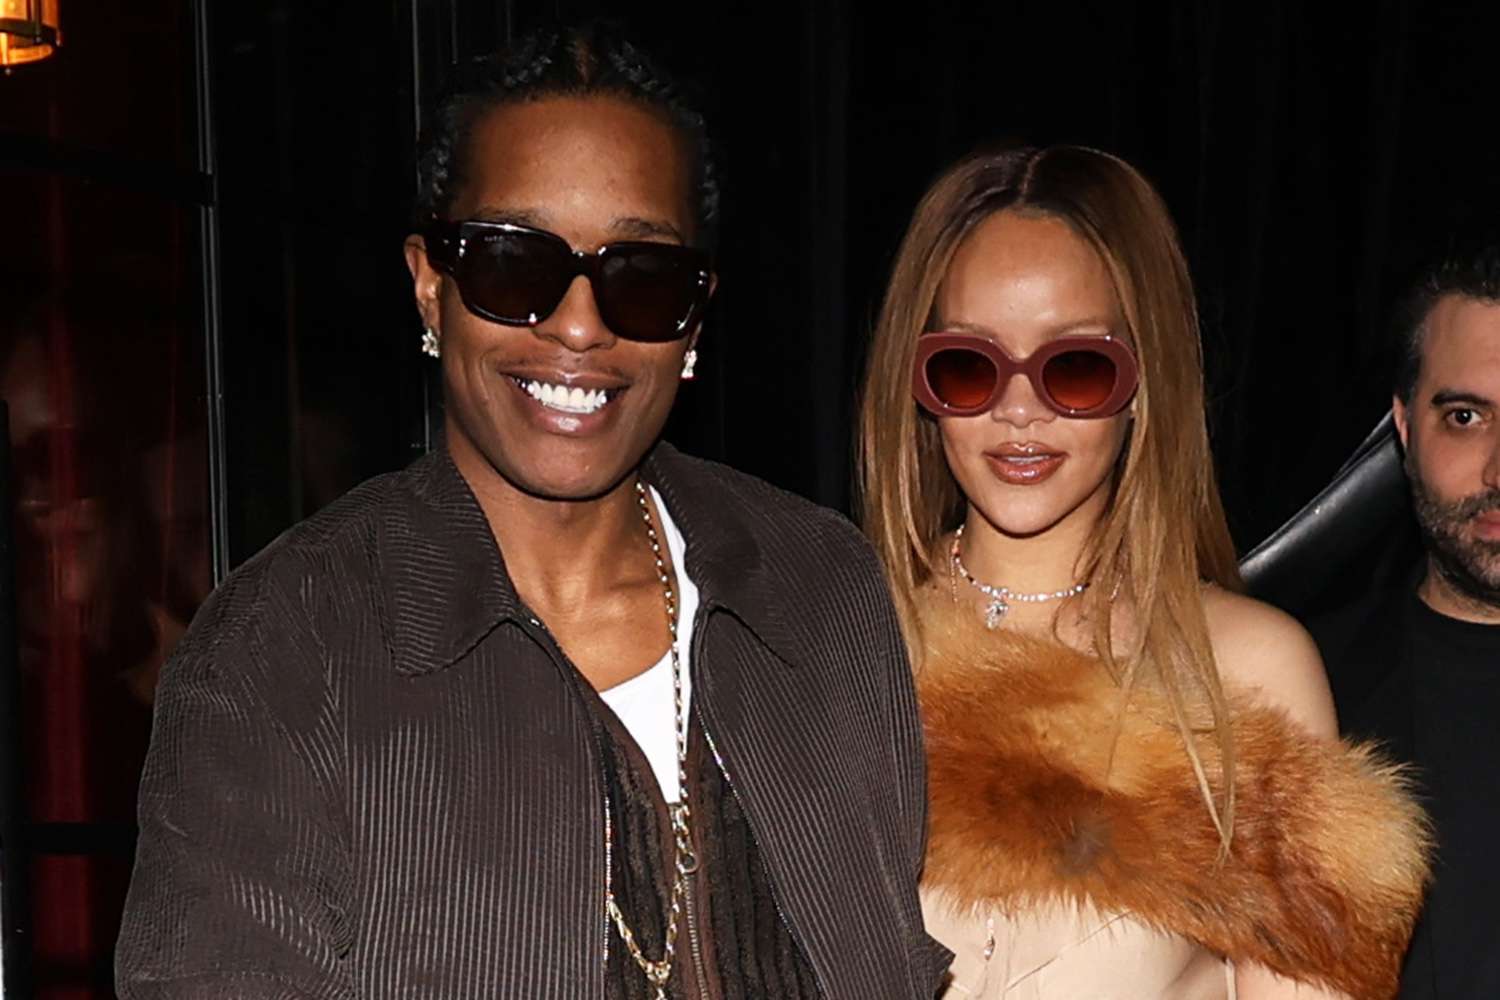 Rihanna And A$AP Rocky’s Valentine’s Day Dinner In Paris Interrupted By Paparazzi